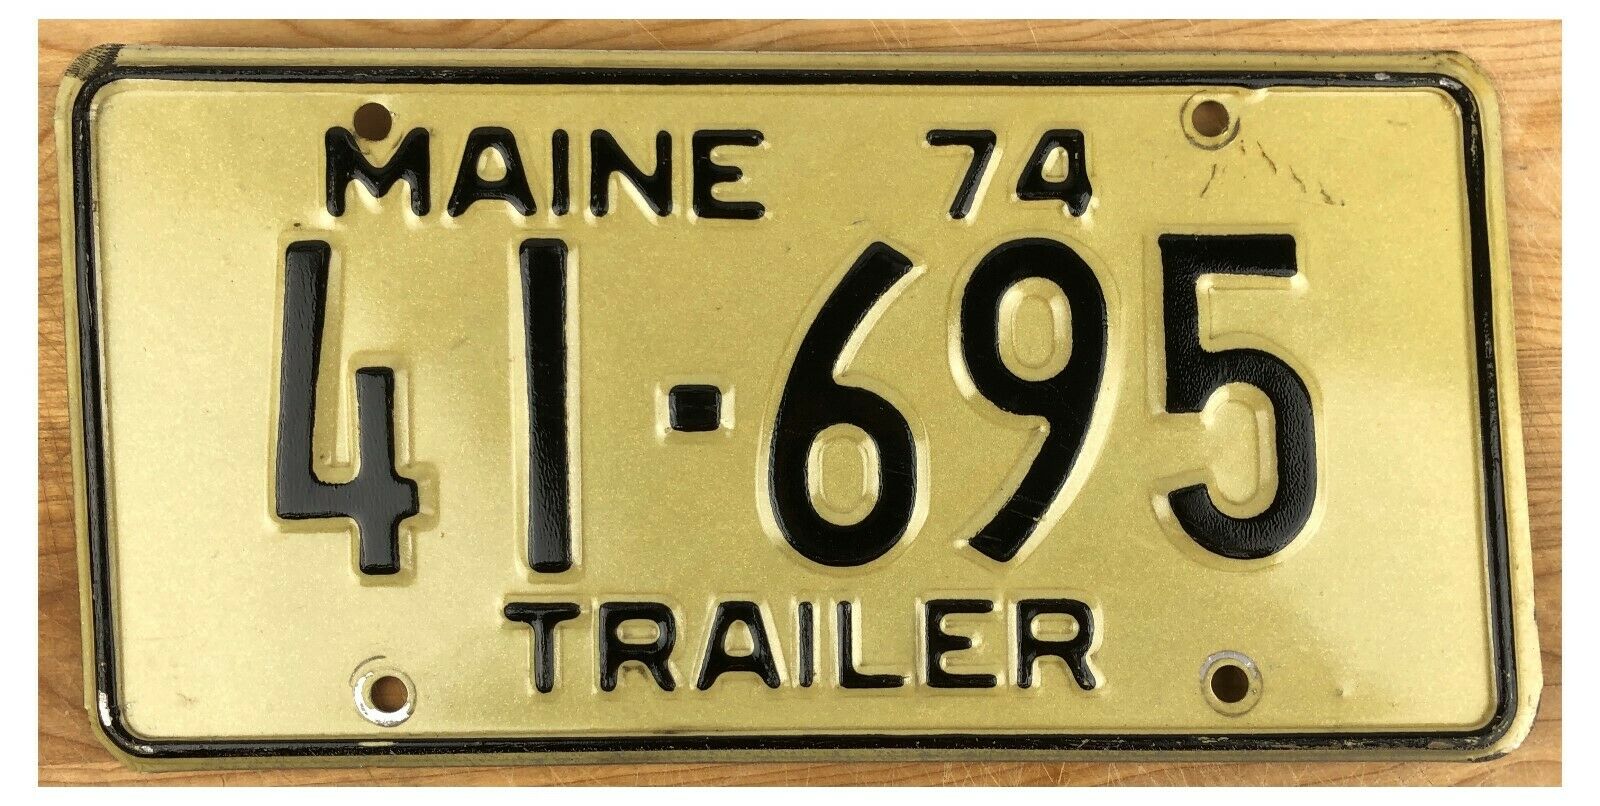 Maine 1974 Trailer License Plate 41-695 With Registration!